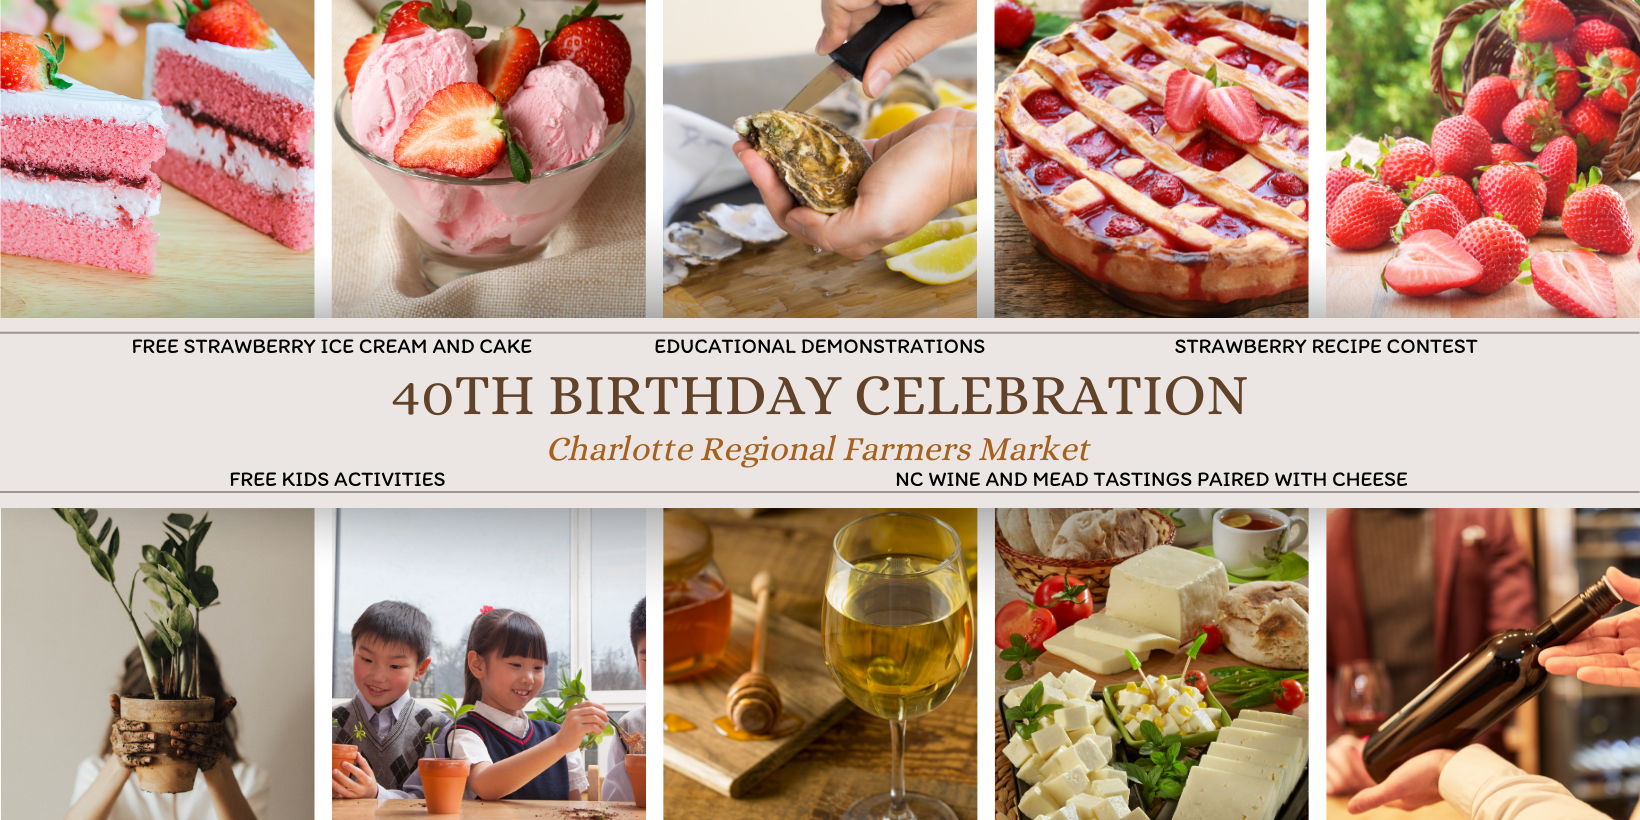 40th Birthday Celebration for the Charlotte Regional Farmers Market promotional image